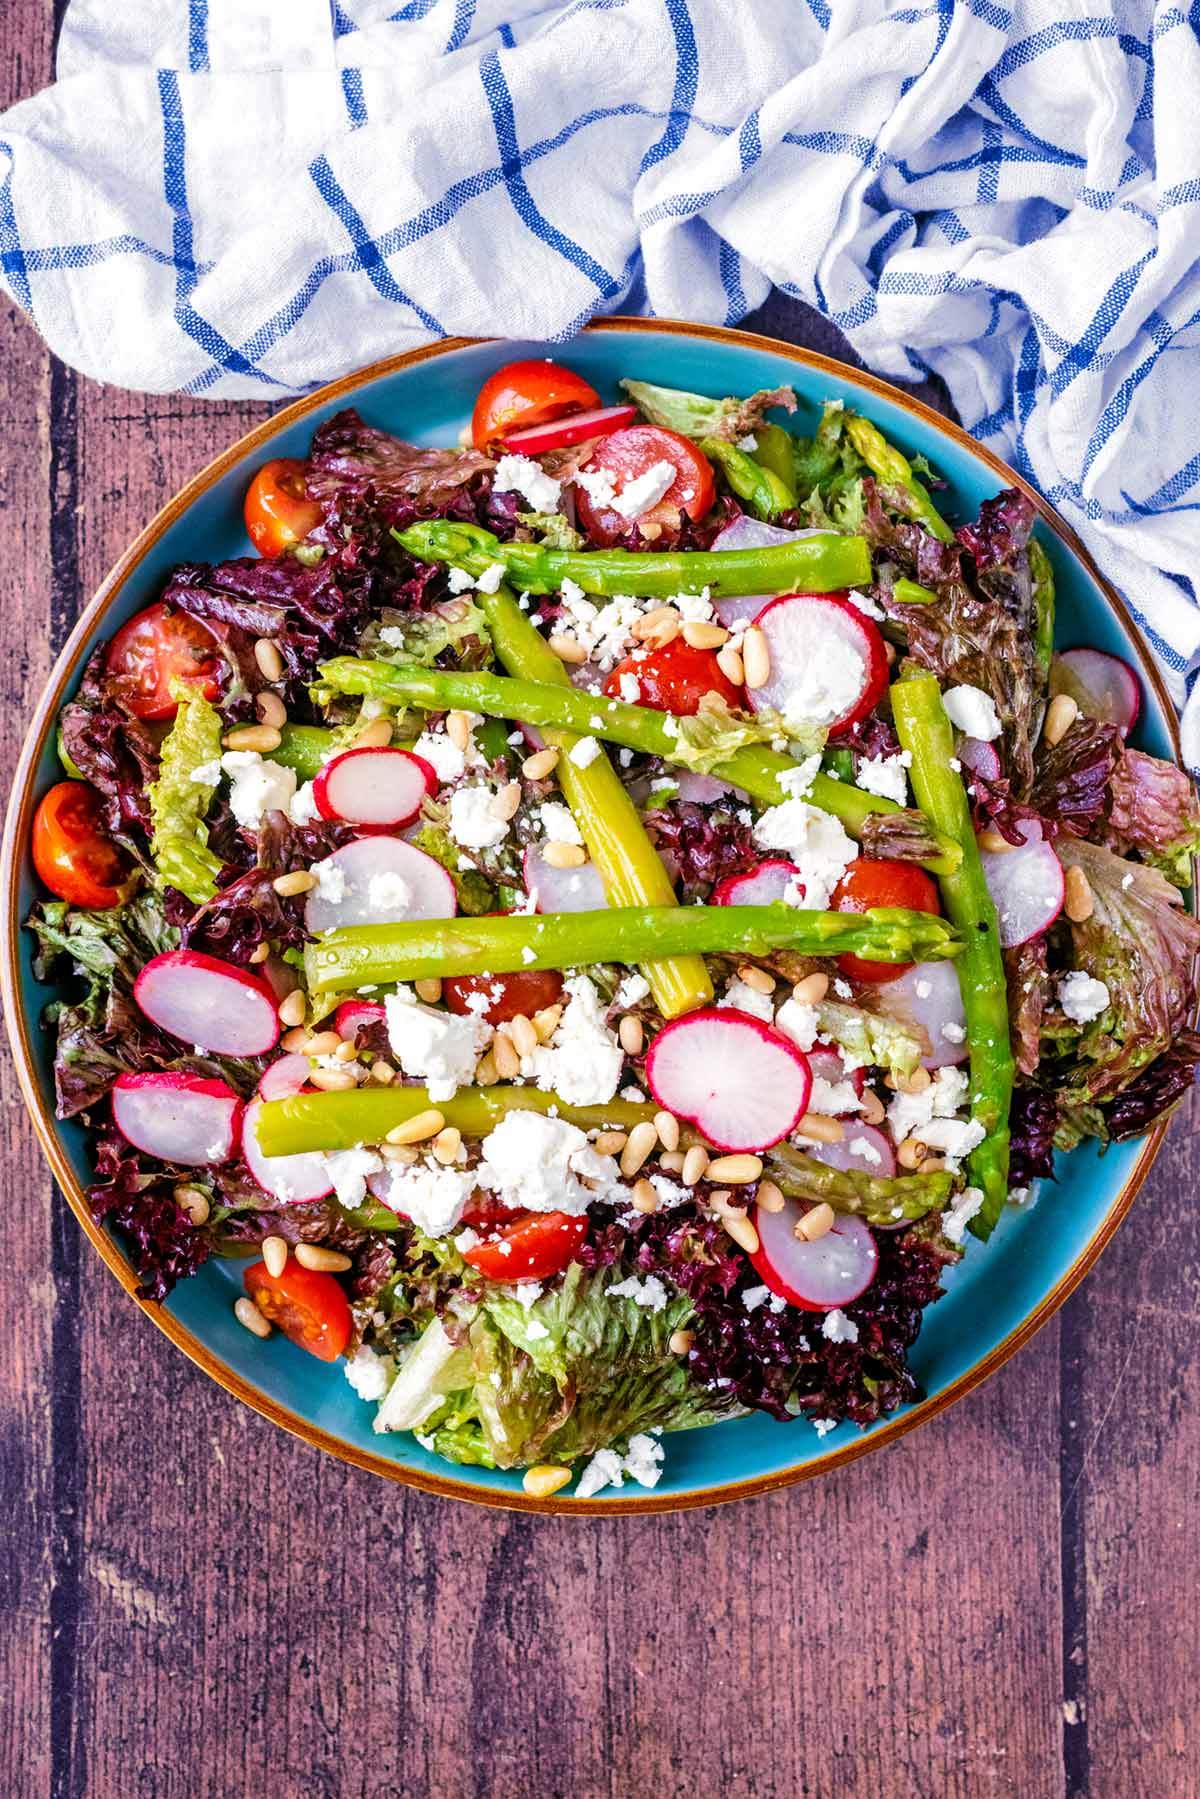 A plate of salad topped with asparagus spears and crumbled feta cheese.